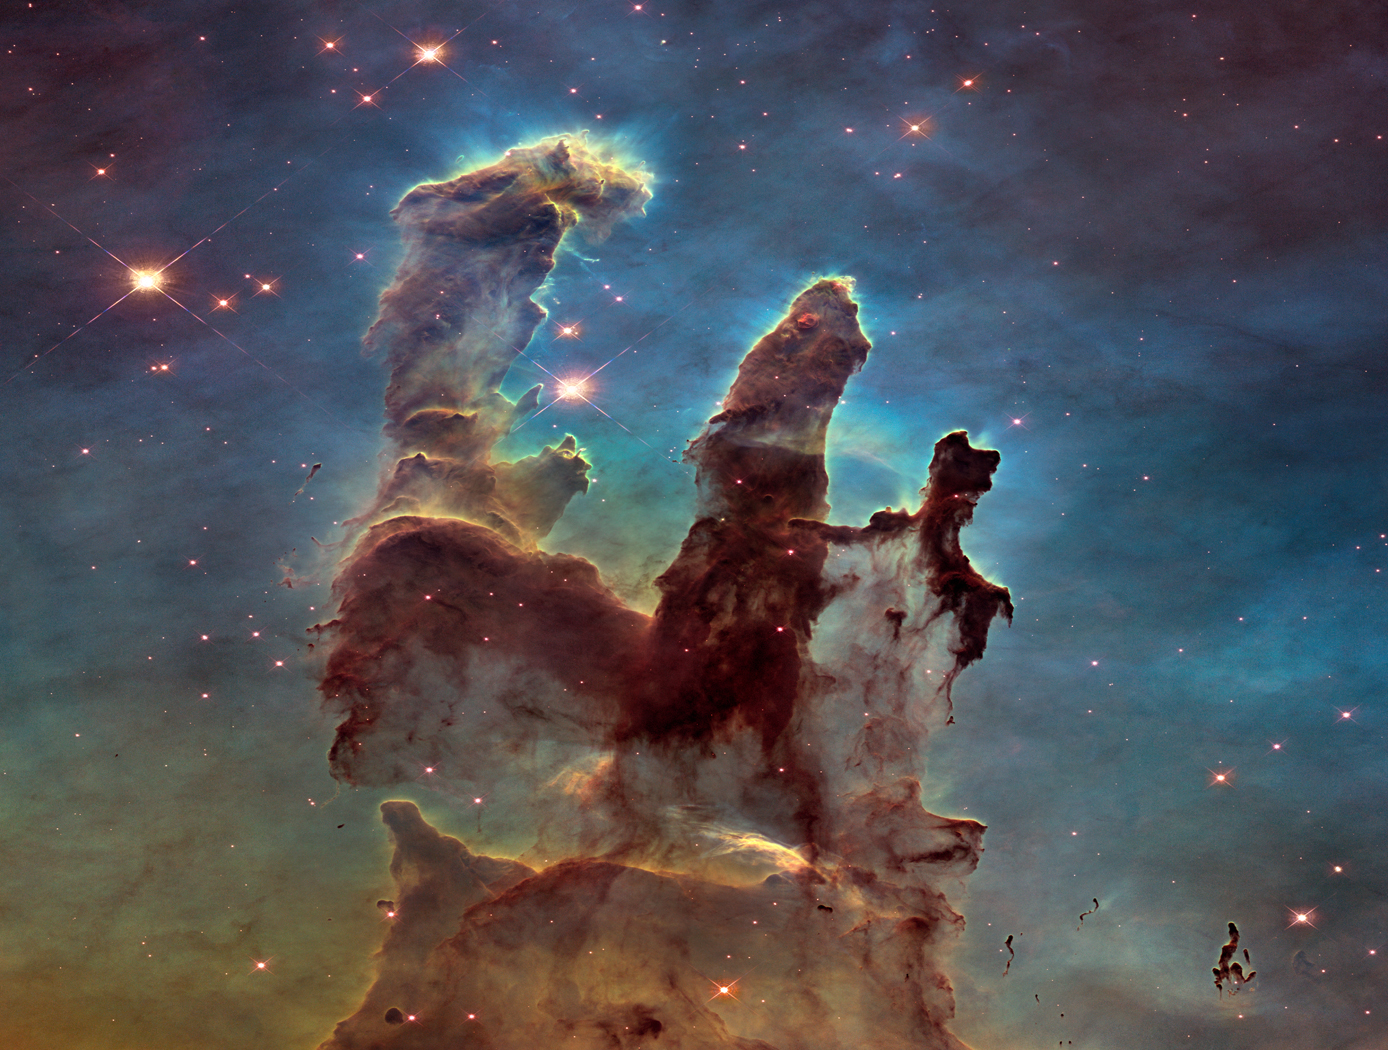 NASA's Hubble Space Telescope has revisited the famous Pillars of Creation, revealing a sharper and wider view of the structures in this visible-light image.